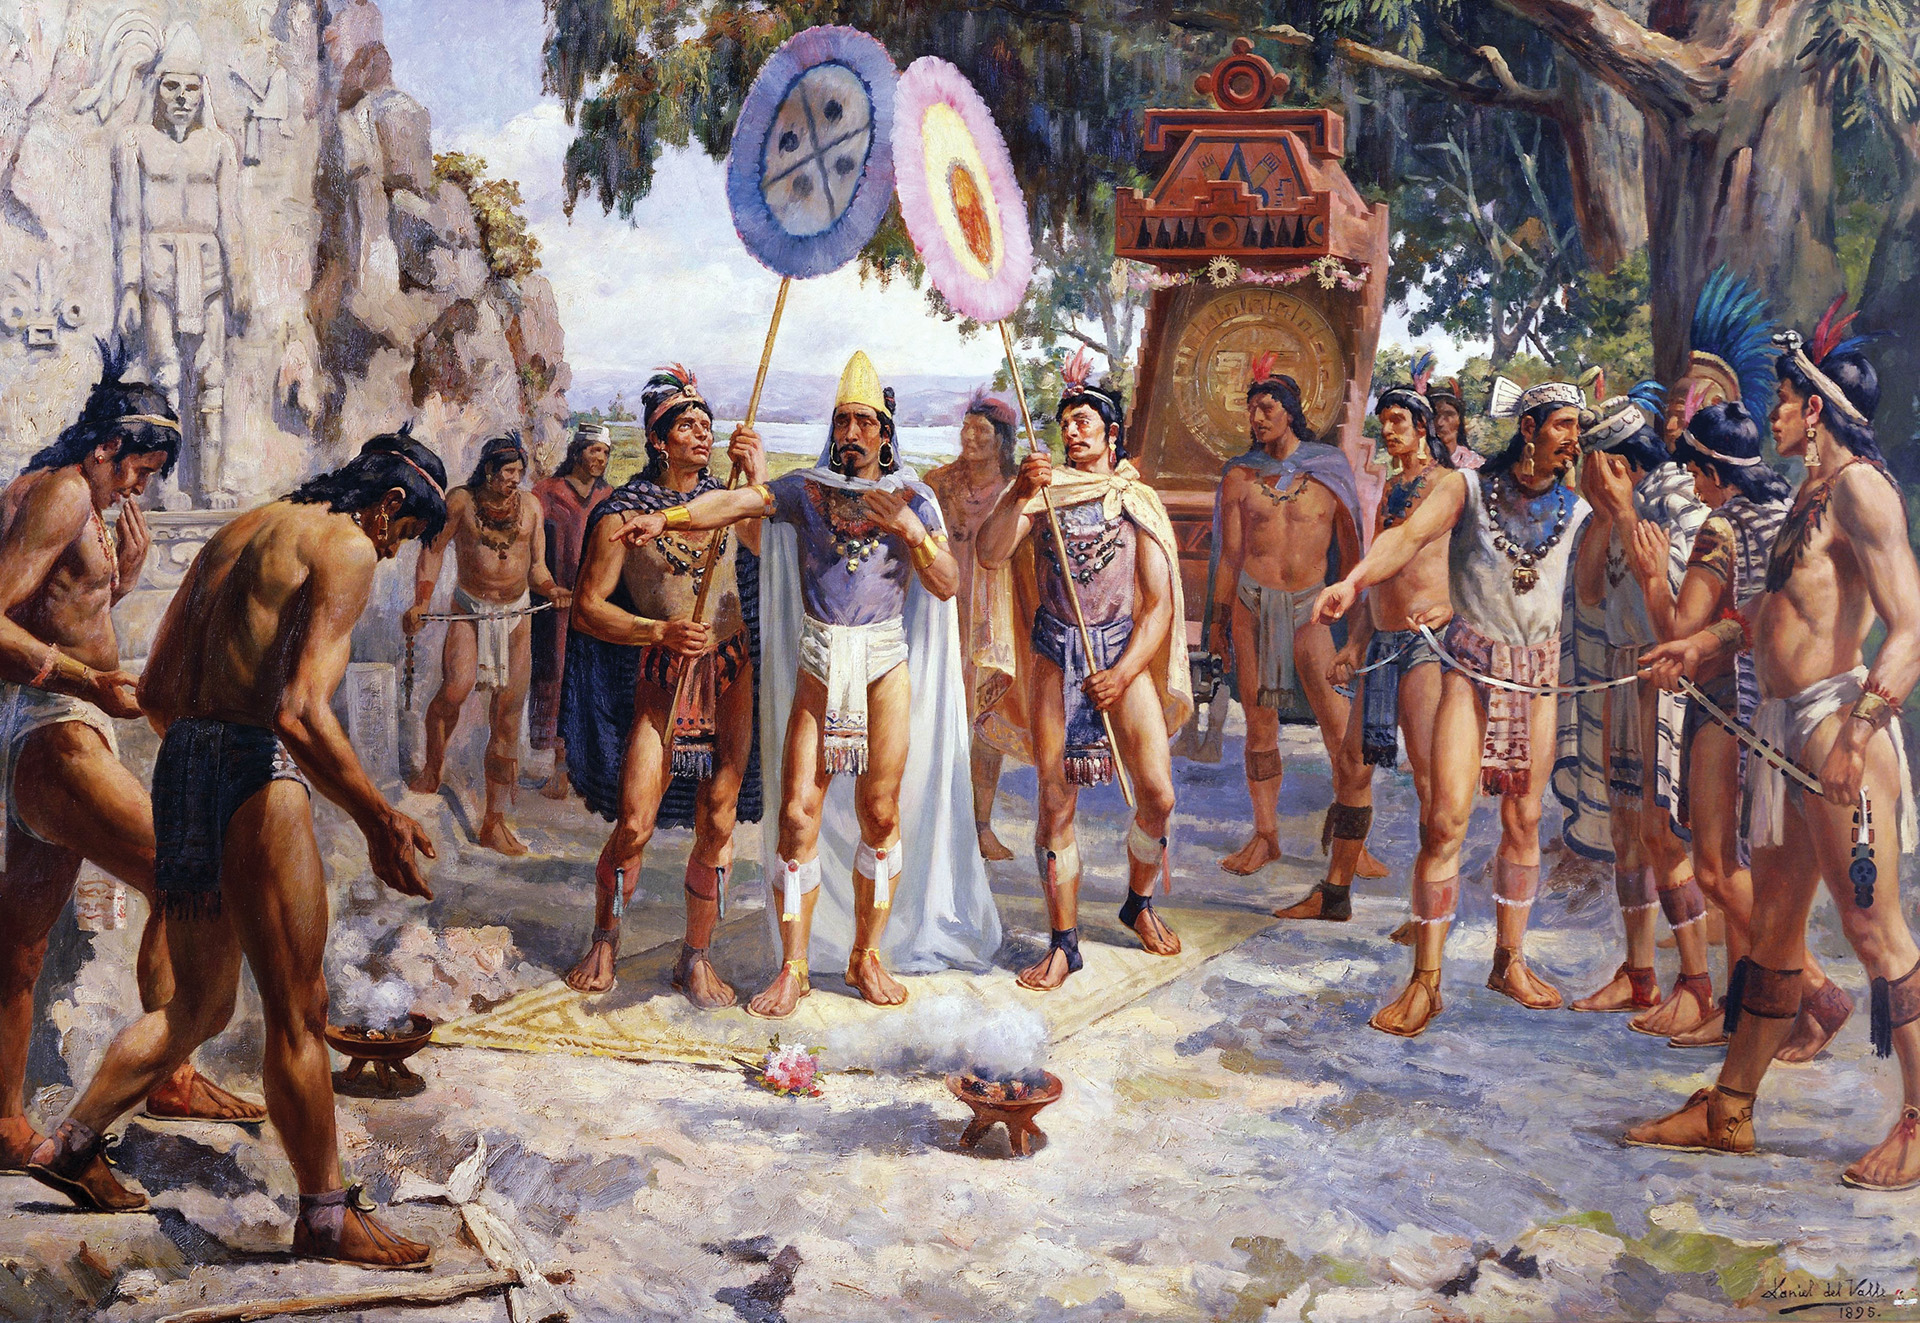 Aztec Emperor Montezuma II needed a steady stream of sacrificial victims for their religious rituals, and this brutality created strong resentment among all of the empire's subjugated tribes. 